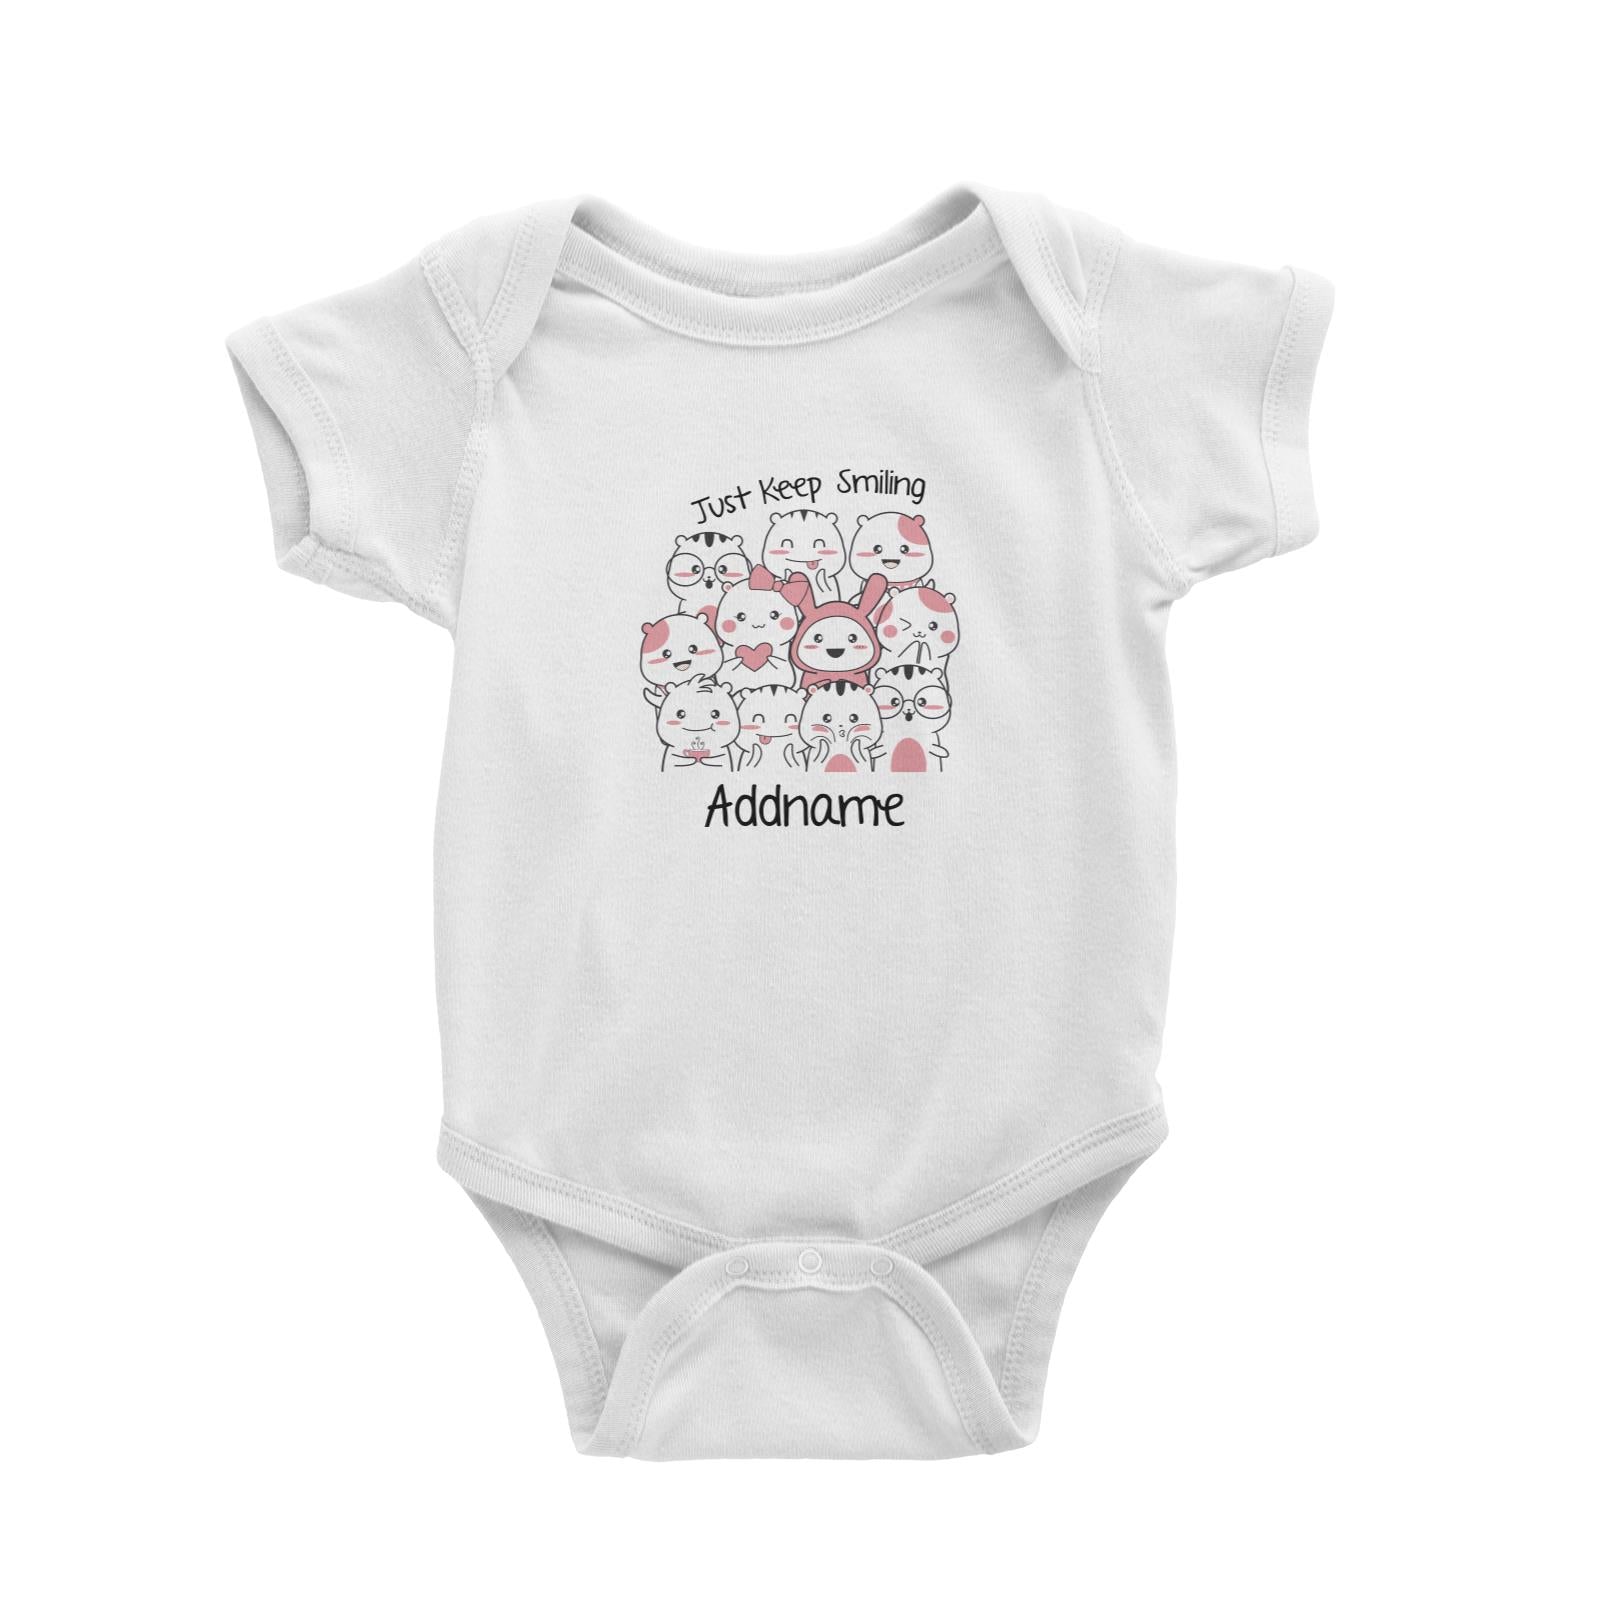 Cute Animals And Friends Series Cute Hamster Just Keep Smiling Addname Baby Romper